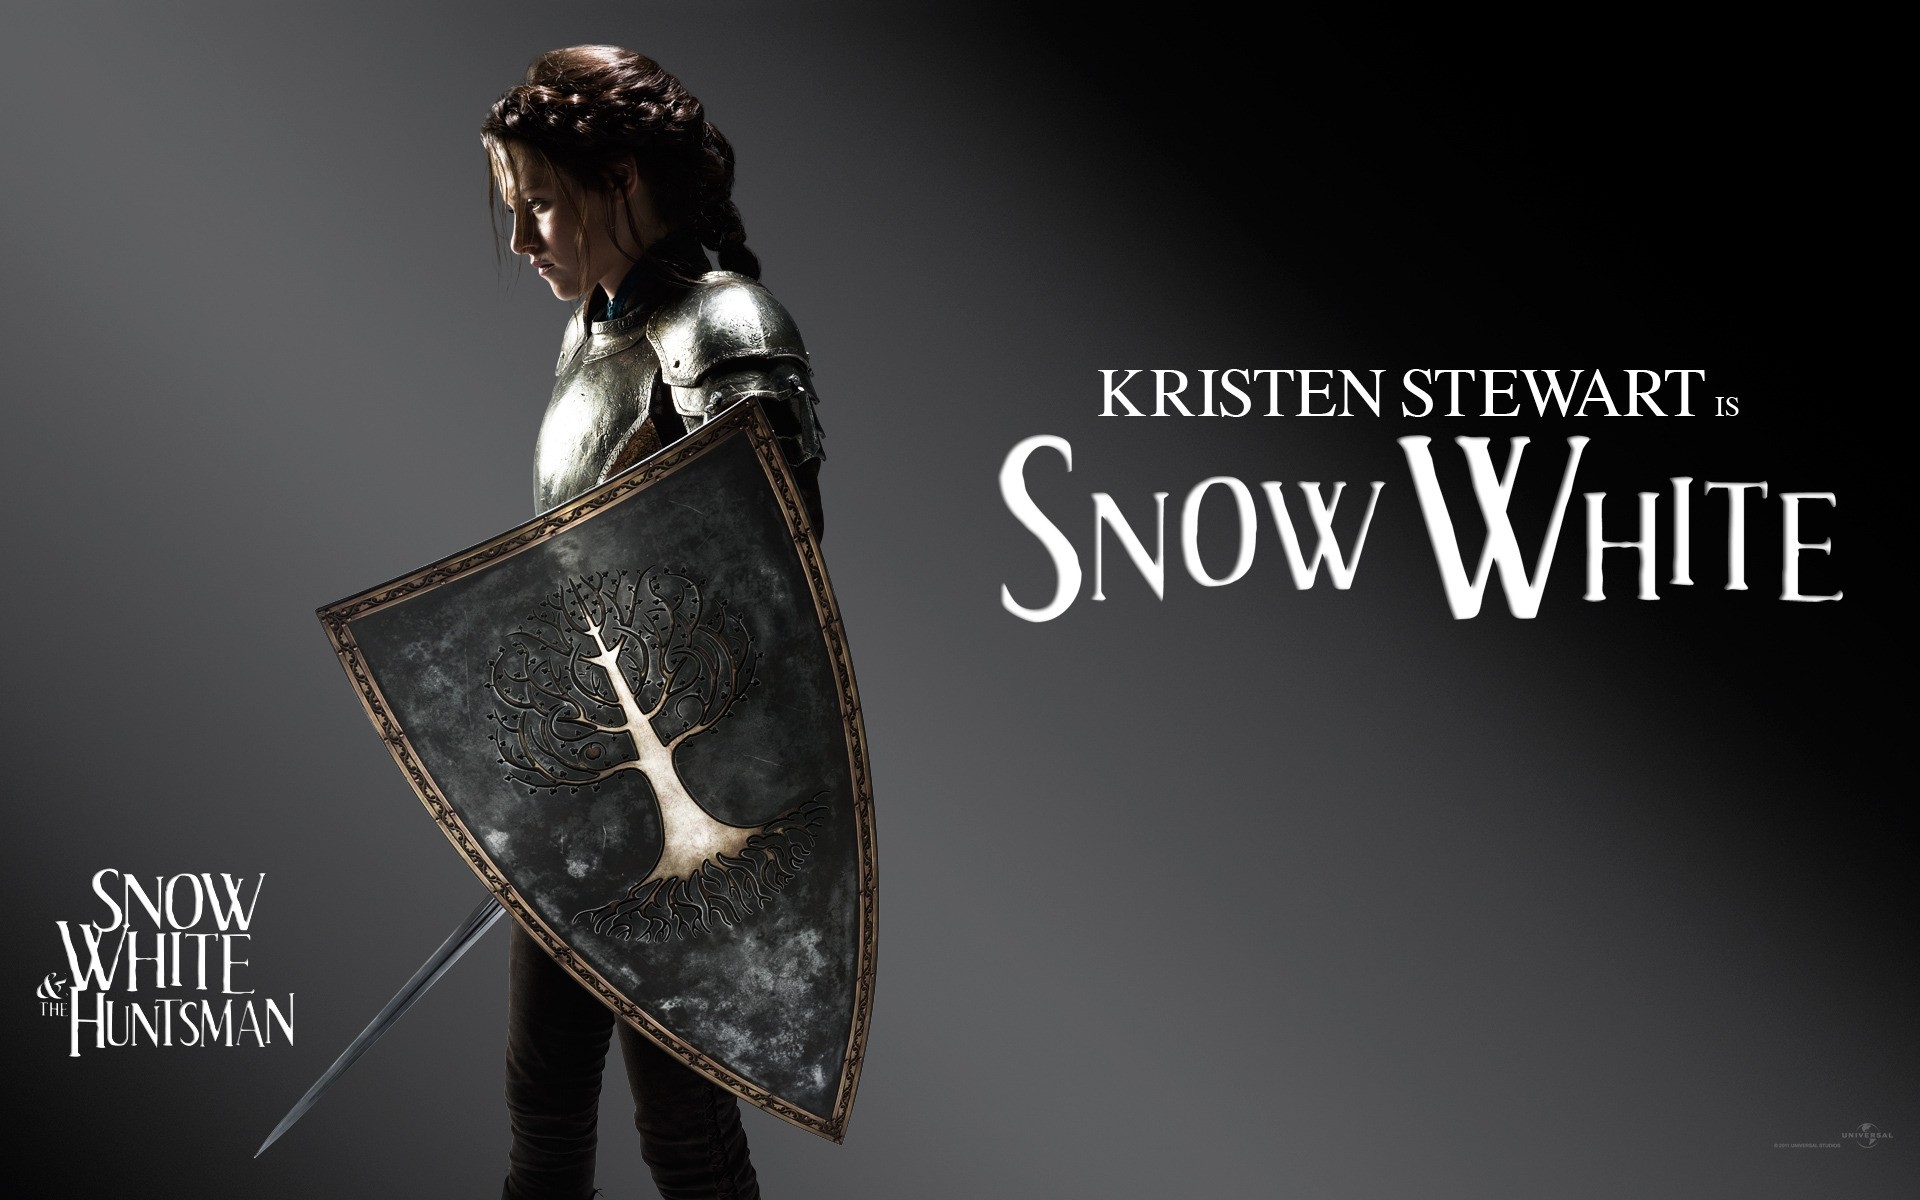 movies woman armor one protection sword retro man dark weapon shield adult steel snow white and the huntsman